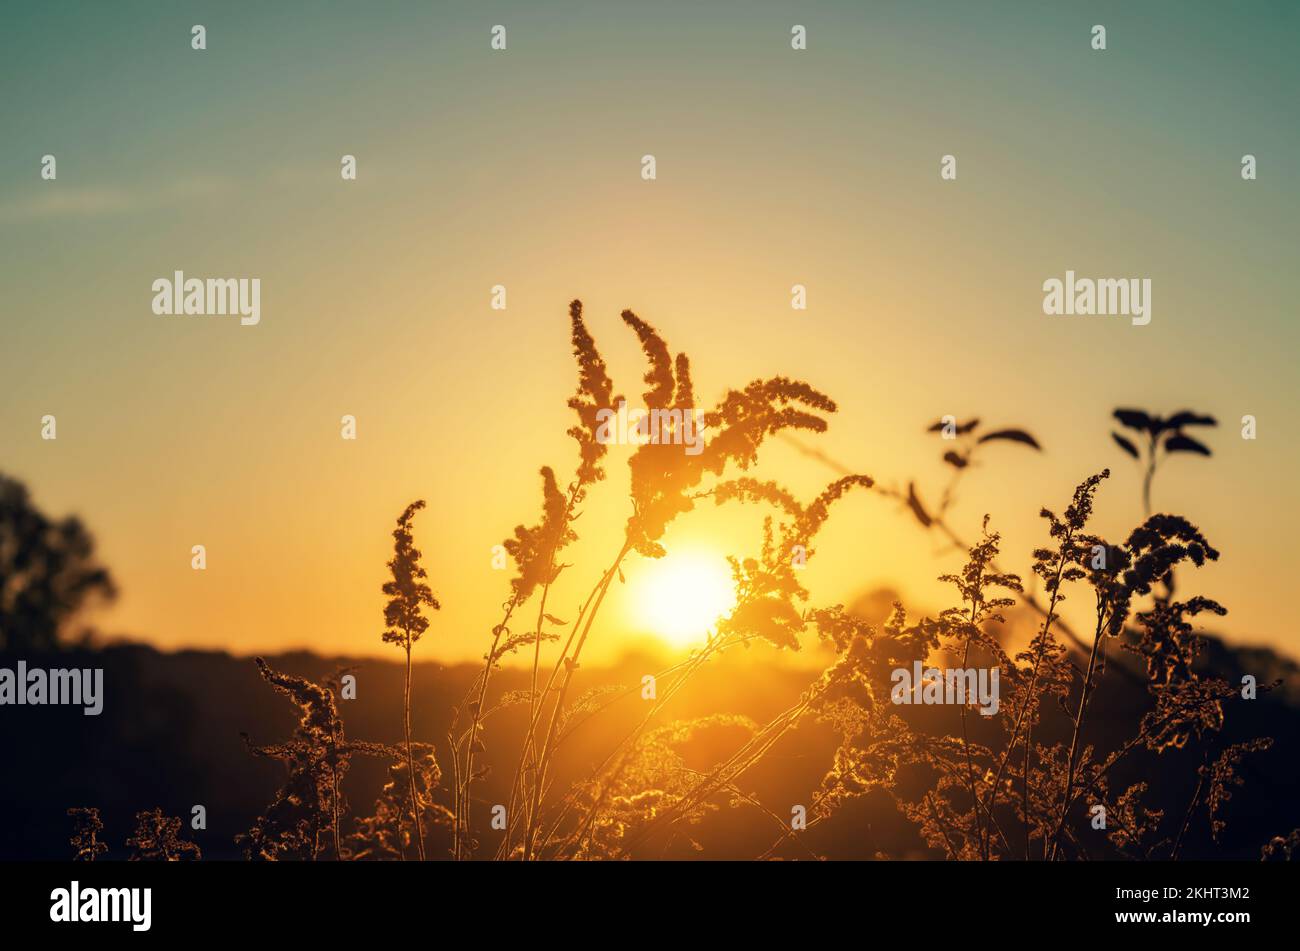 Dry grass-panicles of the Pampas against orange sky with a setting sun. Nature, decorative wild reeds, ecology. Summer evening, dry autumn grass Stock Photo